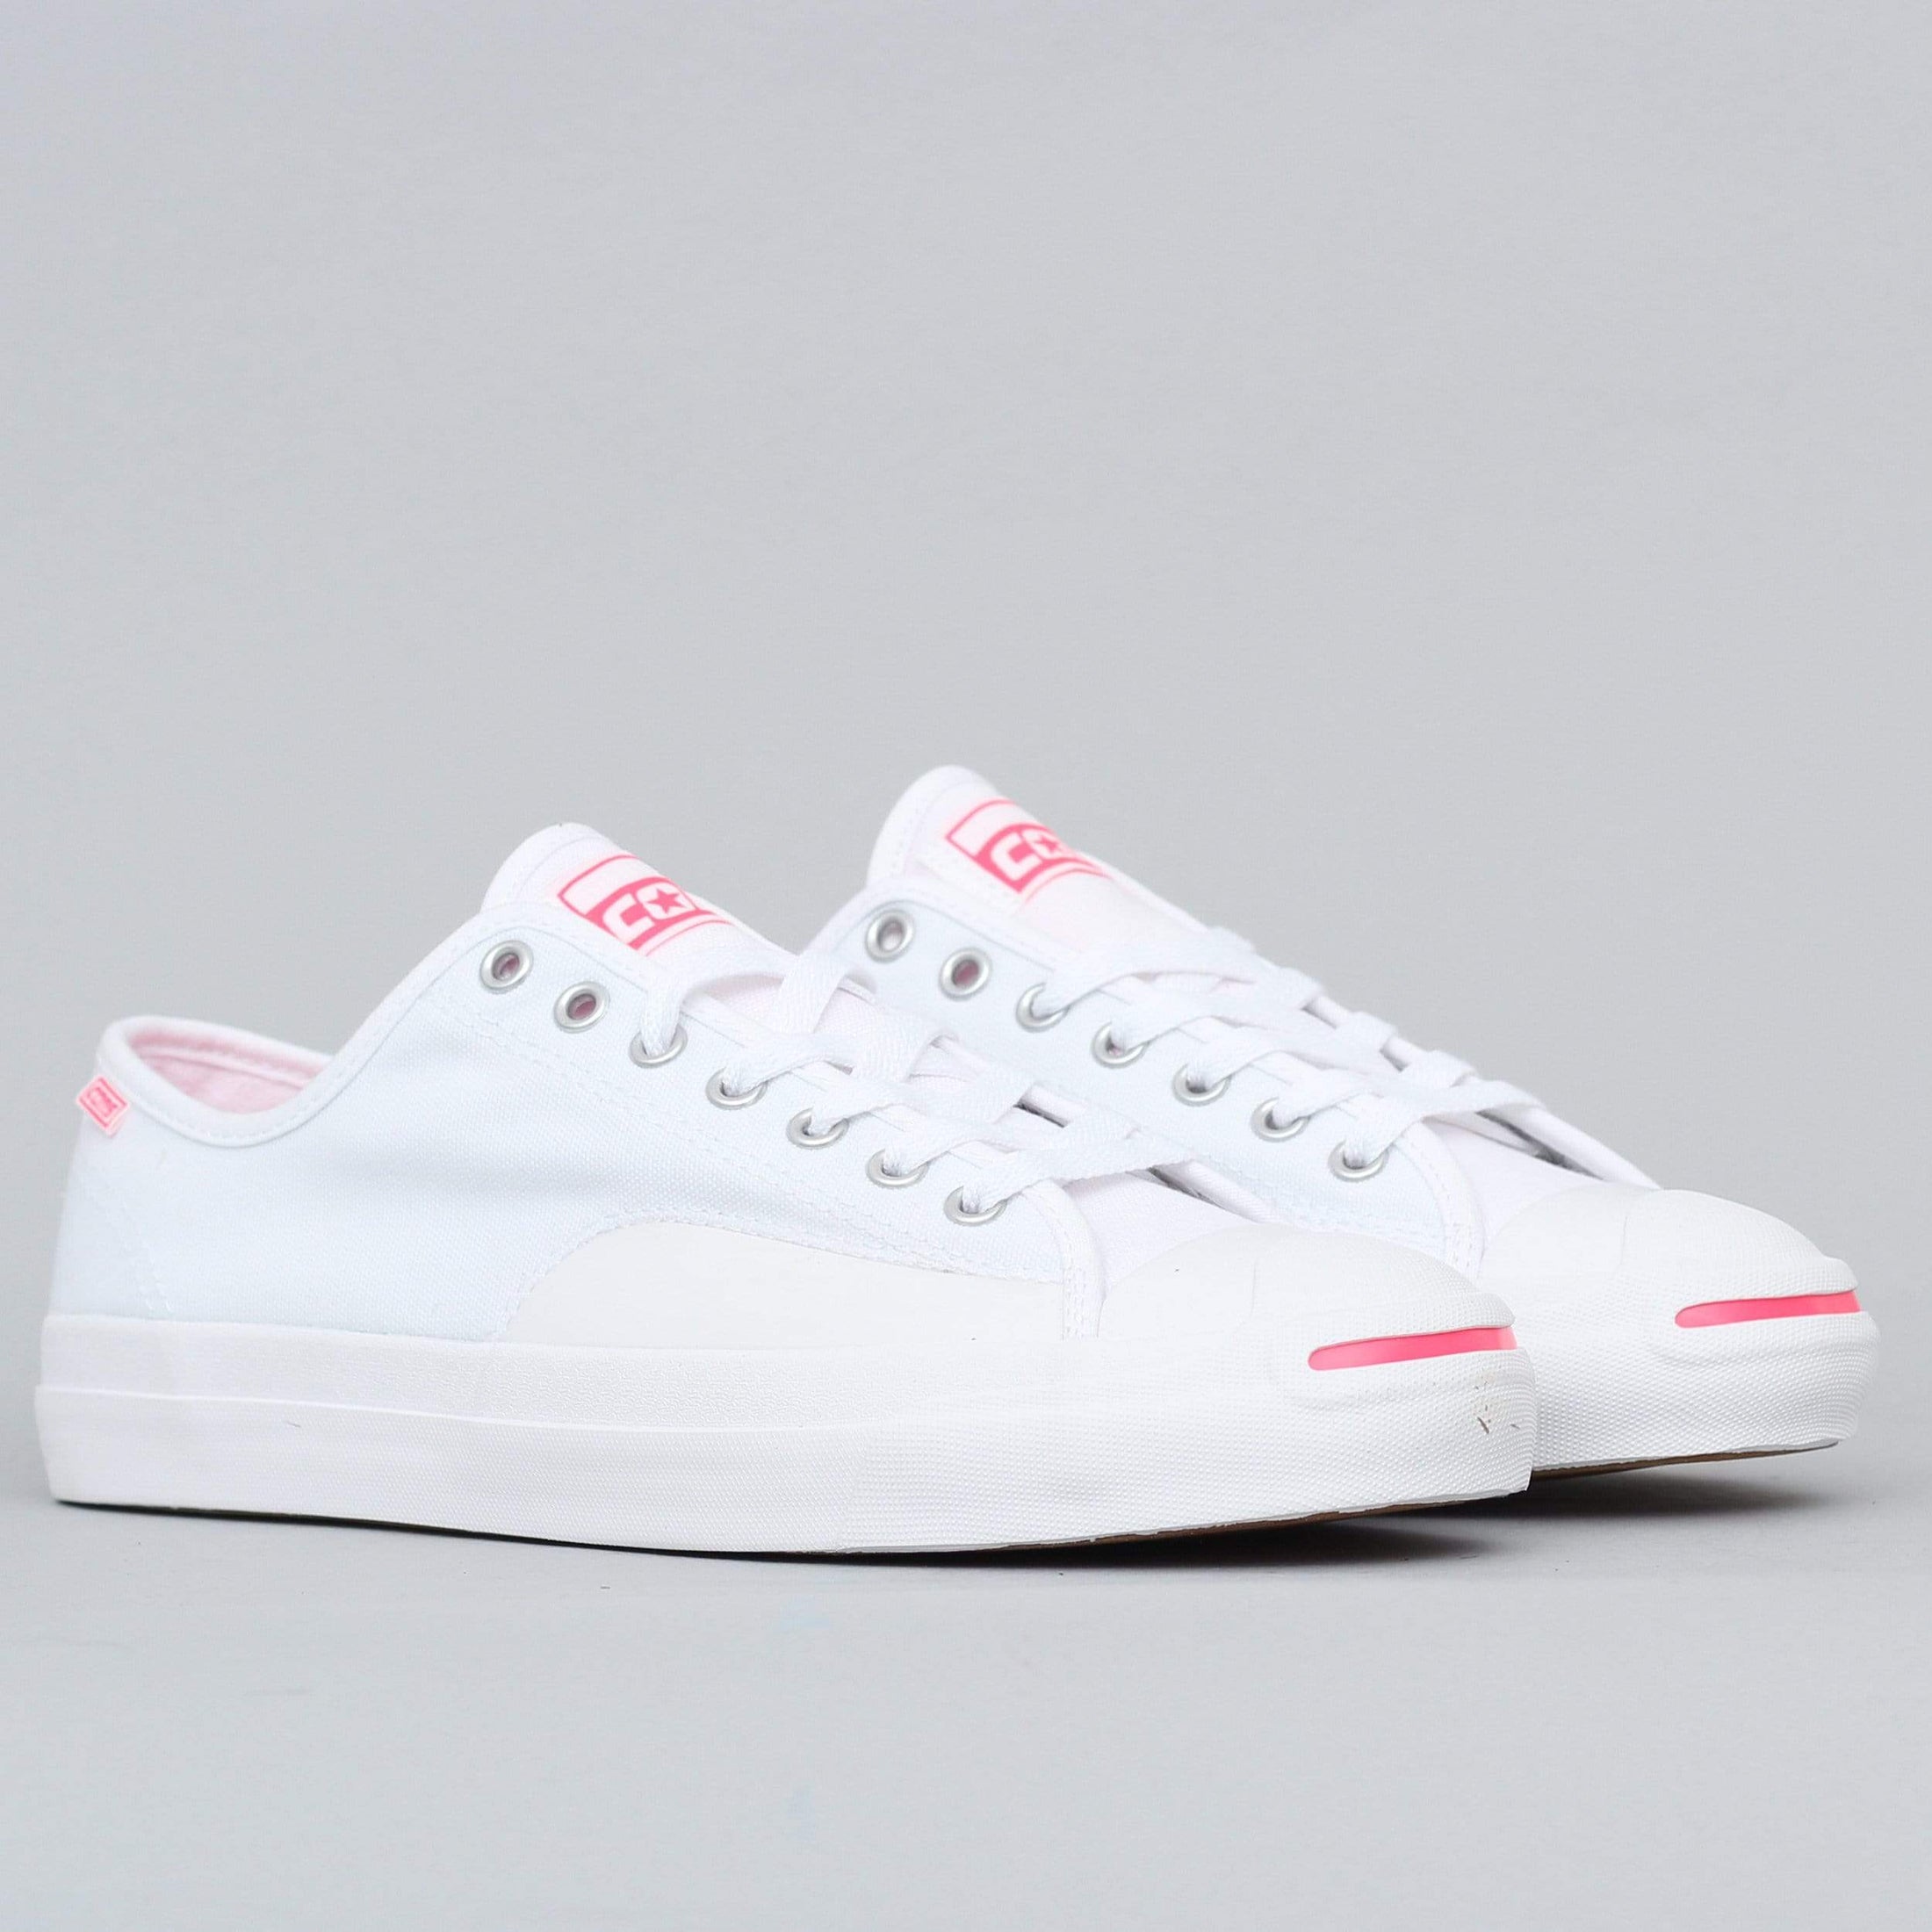 Converse Jack Purcell Pro OP OX Shoes White / Racer Pink / White